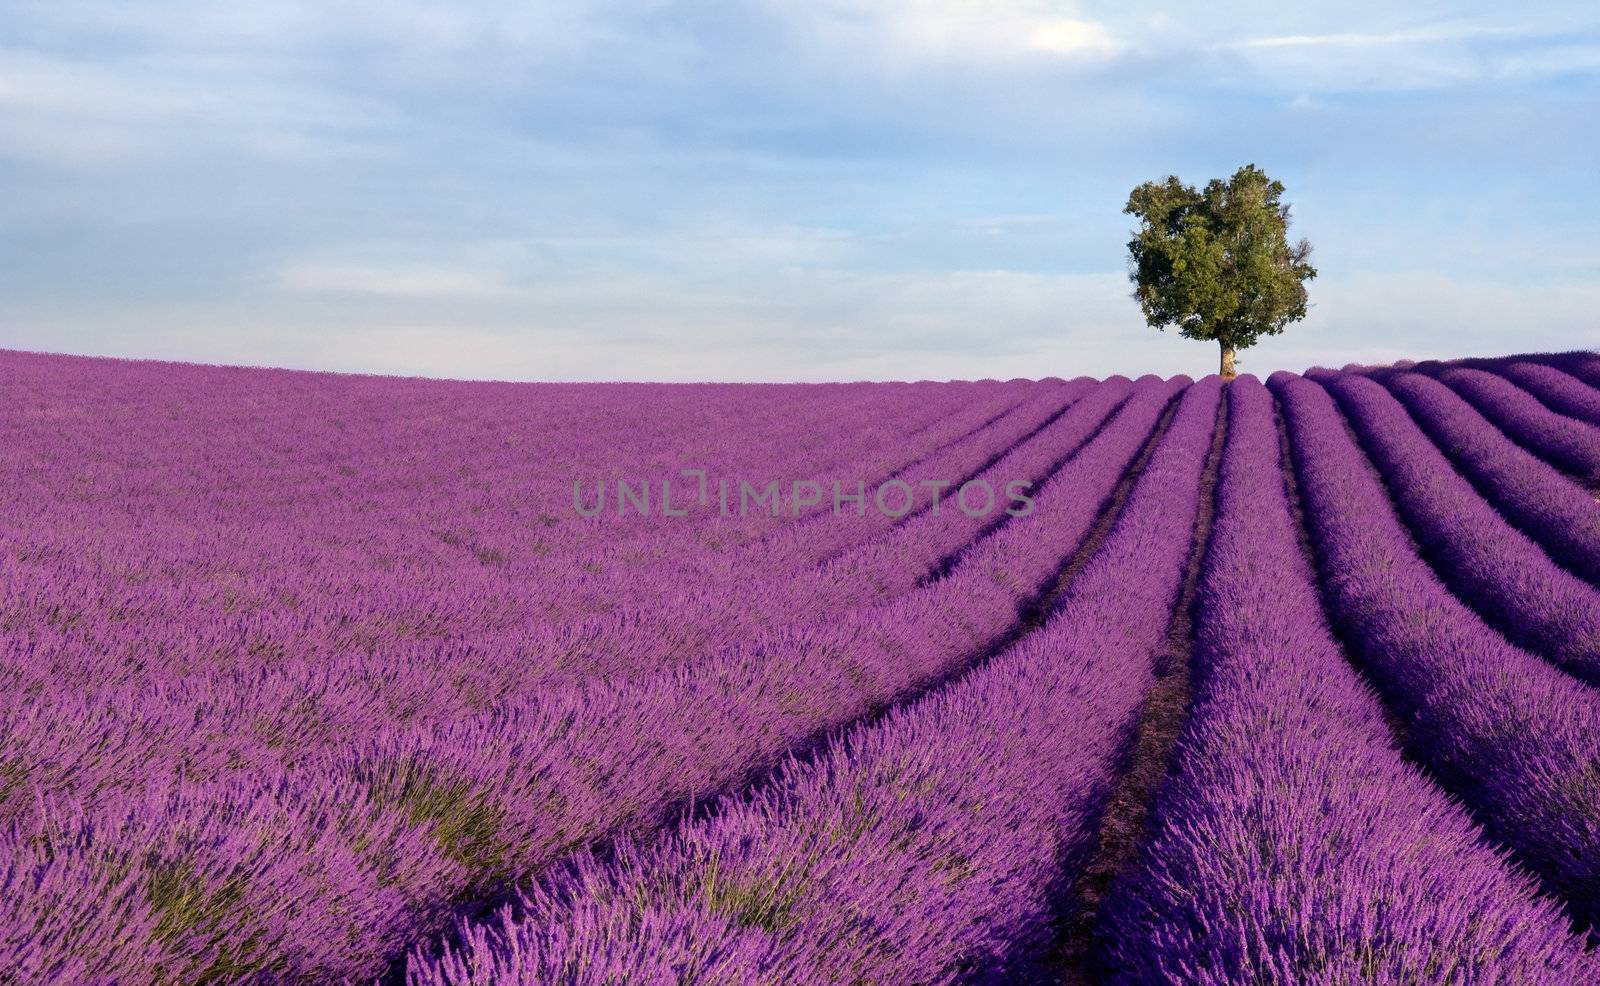 Image shows a  rich lavender field in Provence, France, with a lone tree in the background